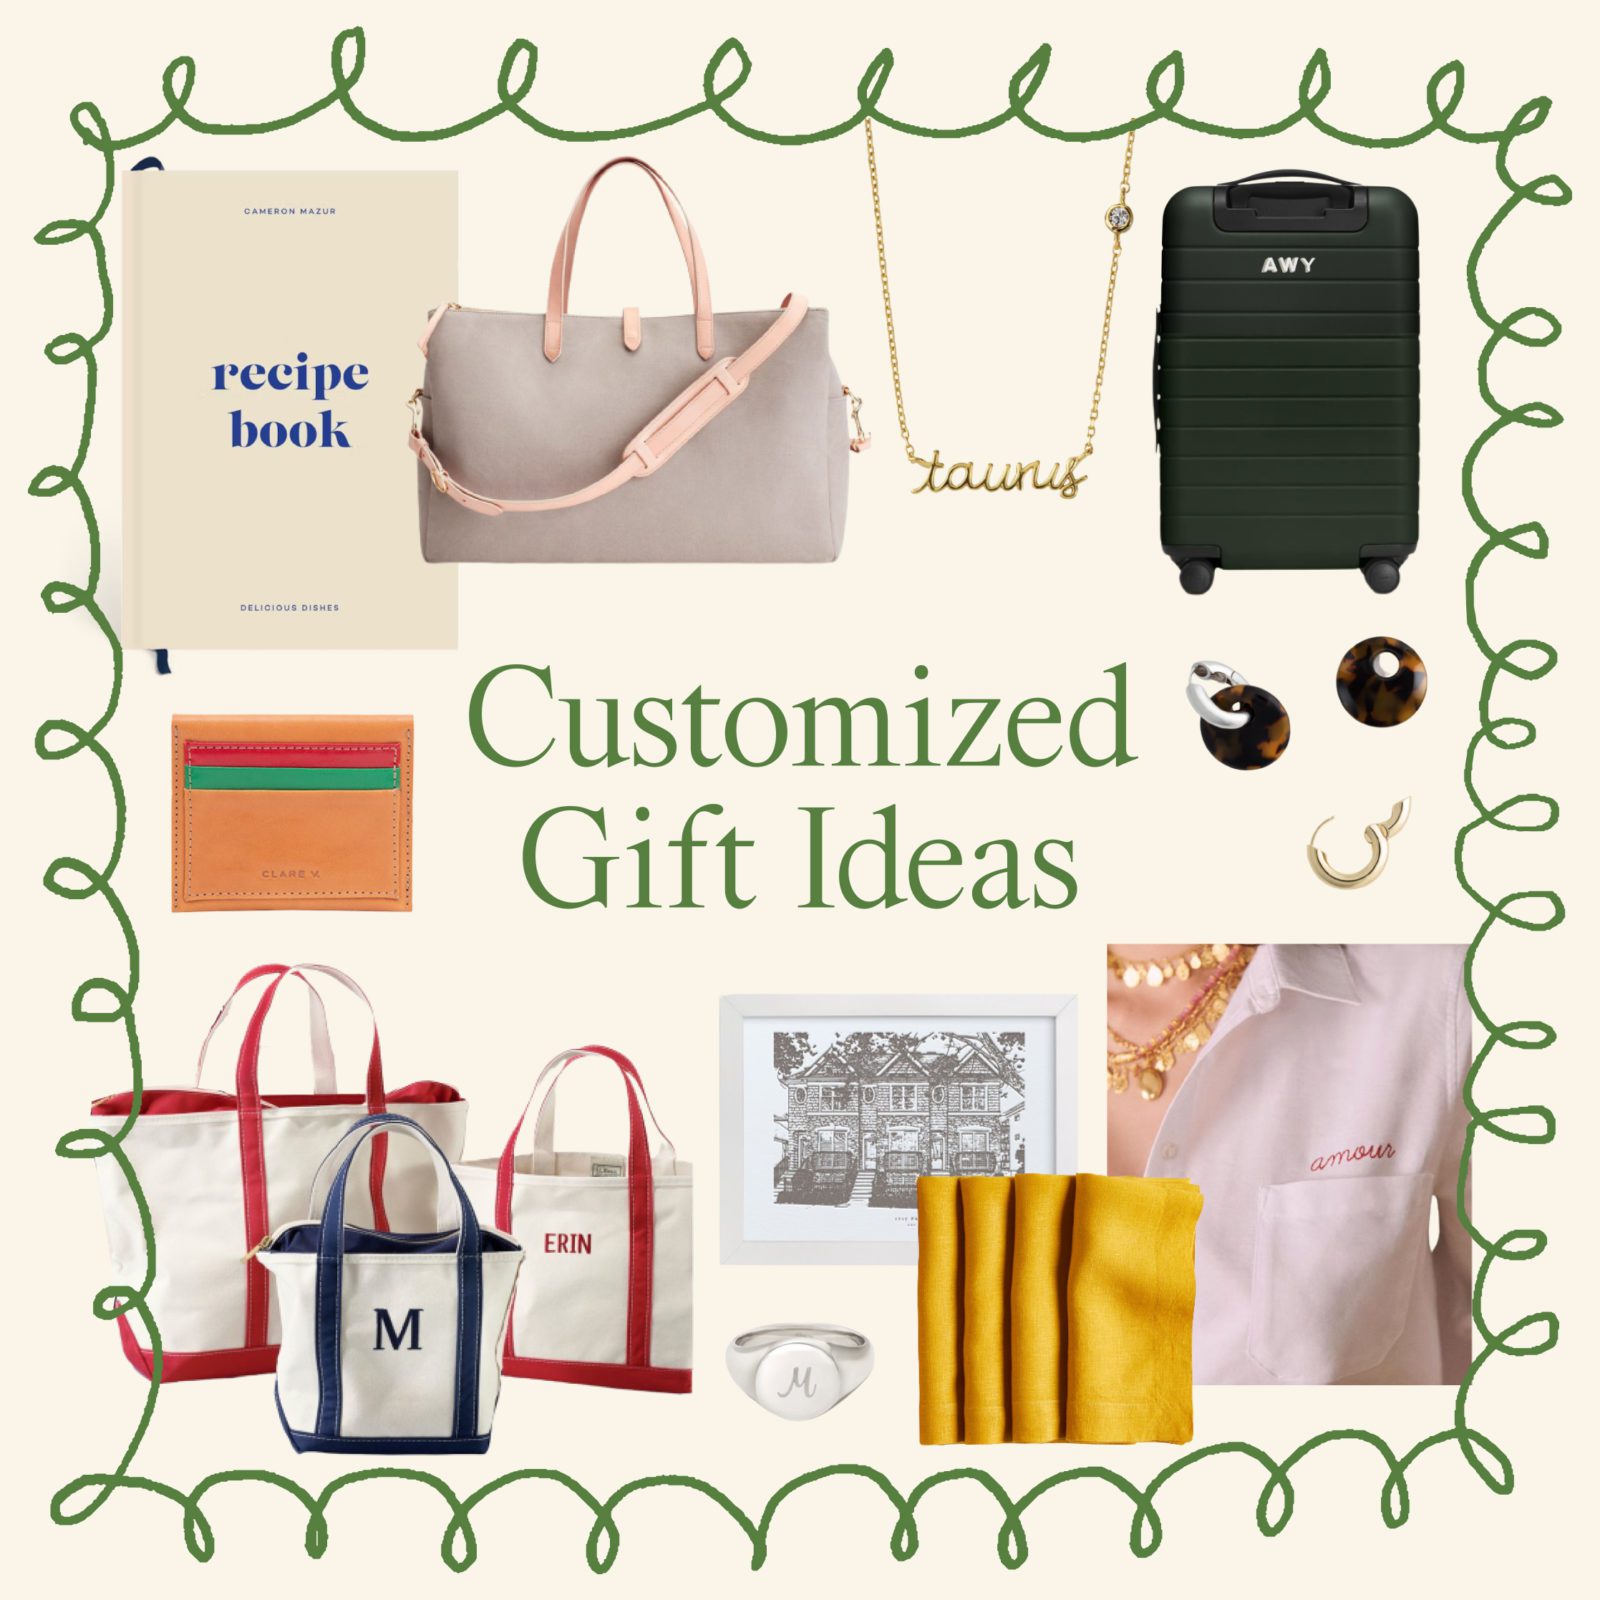 The Complete Wit & Delight 2022 Holiday Gift Guide